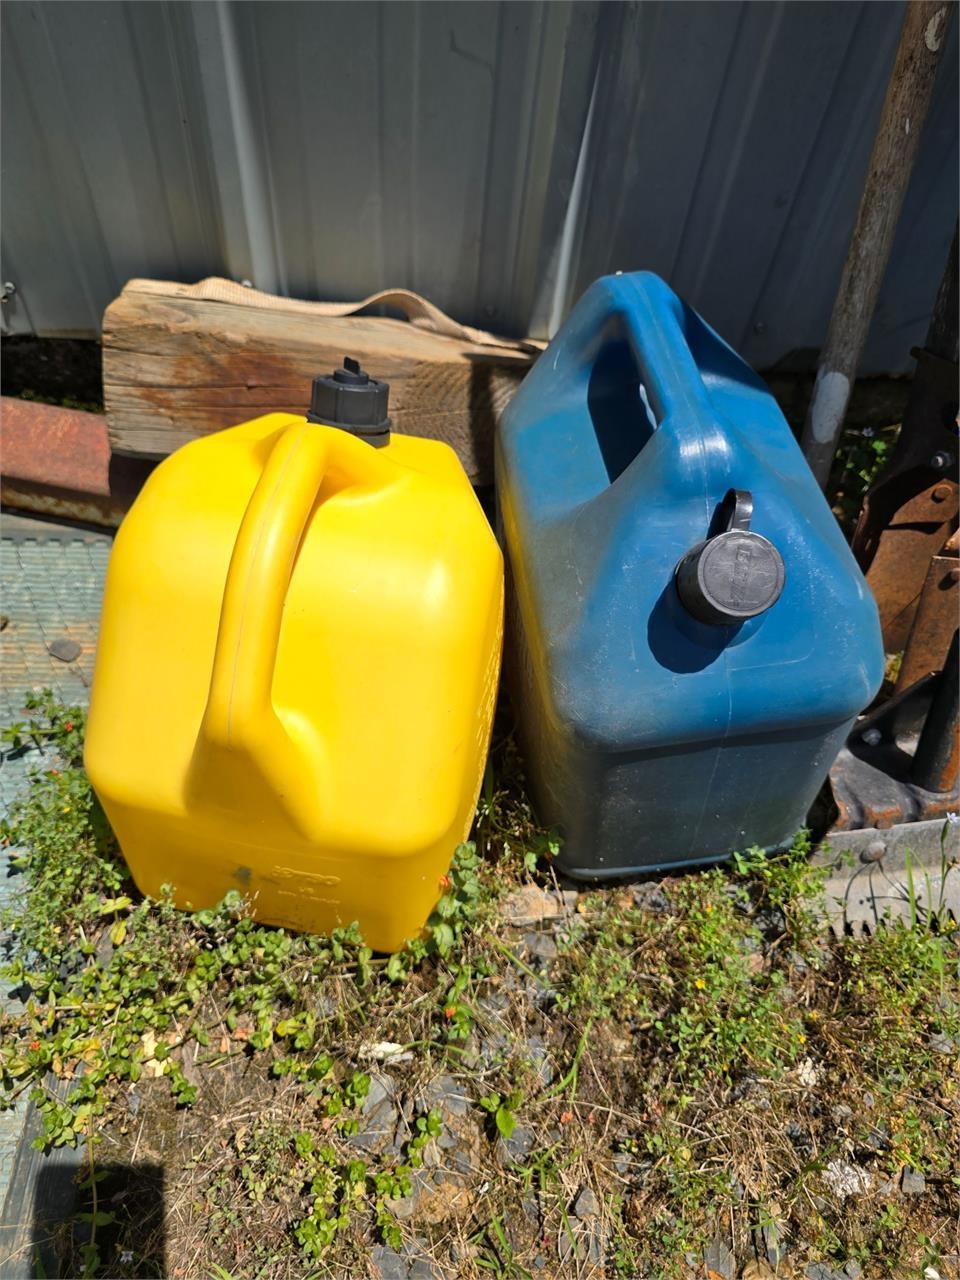 Pair of fuel cans